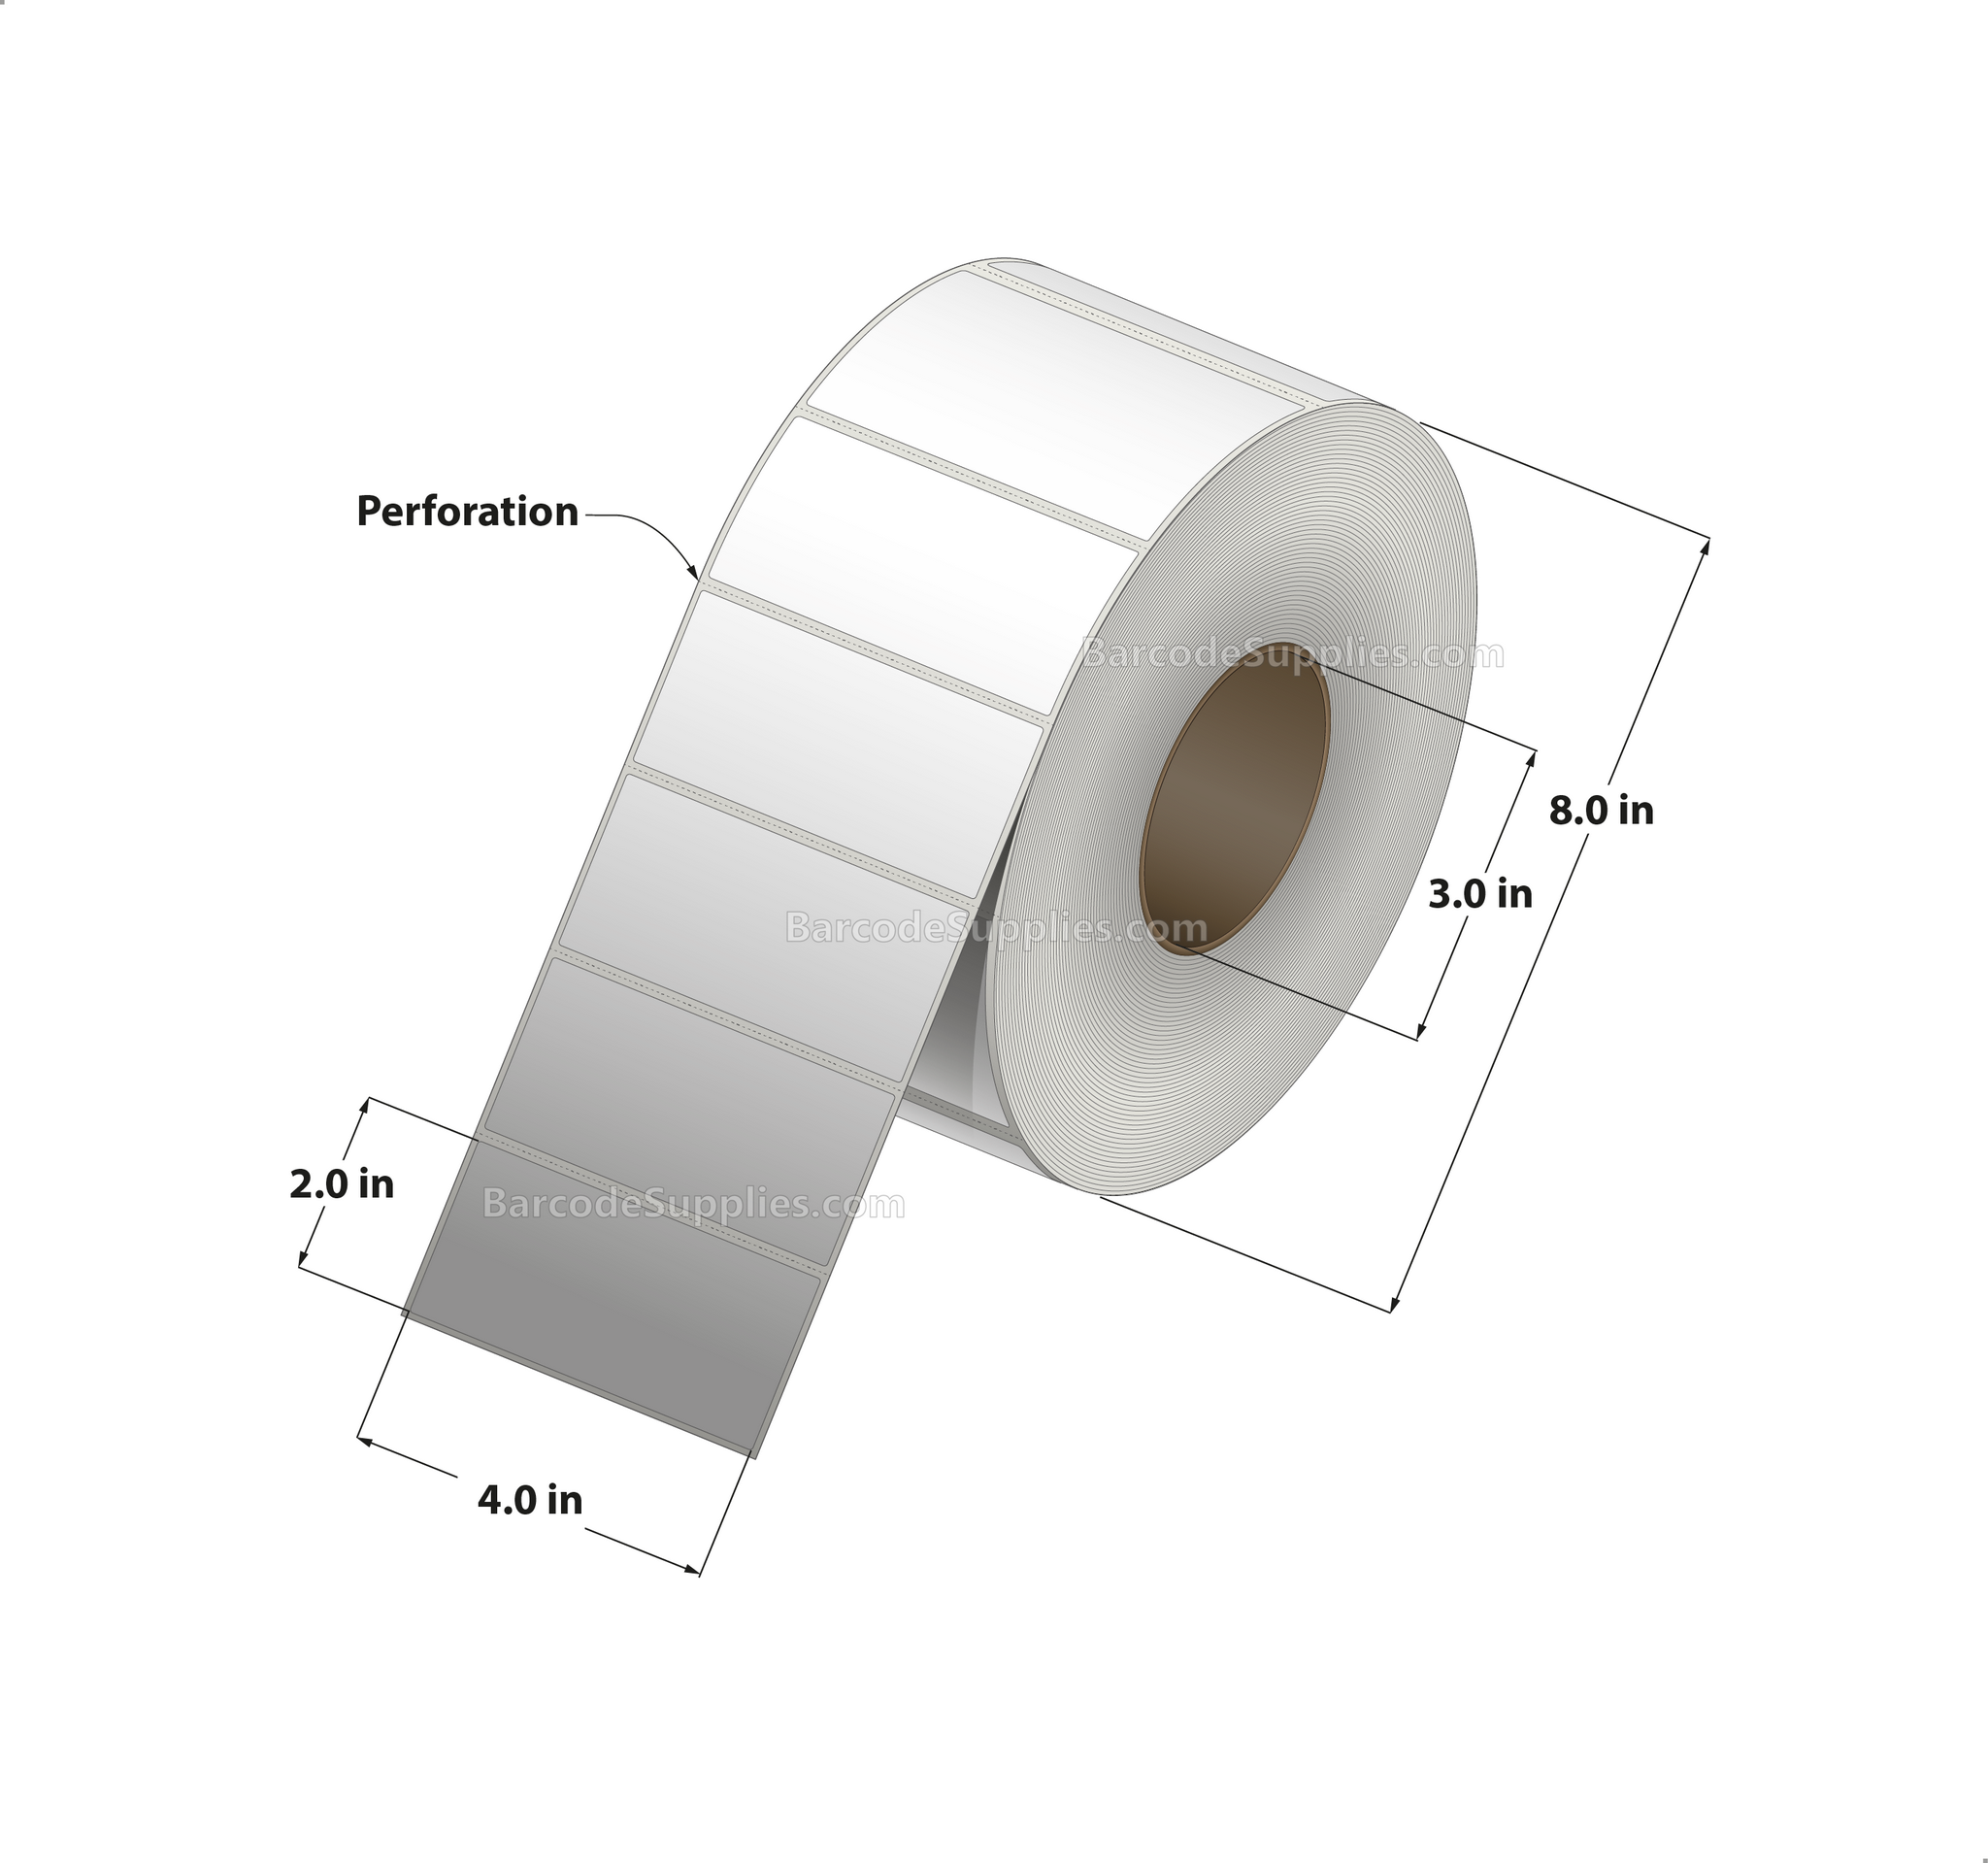 4 x 2 Direct Thermal White Labels With Permanent Acrylic Adhesive - Perforated - 1250 Labels Per Roll - Carton Of 4 Rolls - 5000 Labels Total - MPN: DT42-15PDT